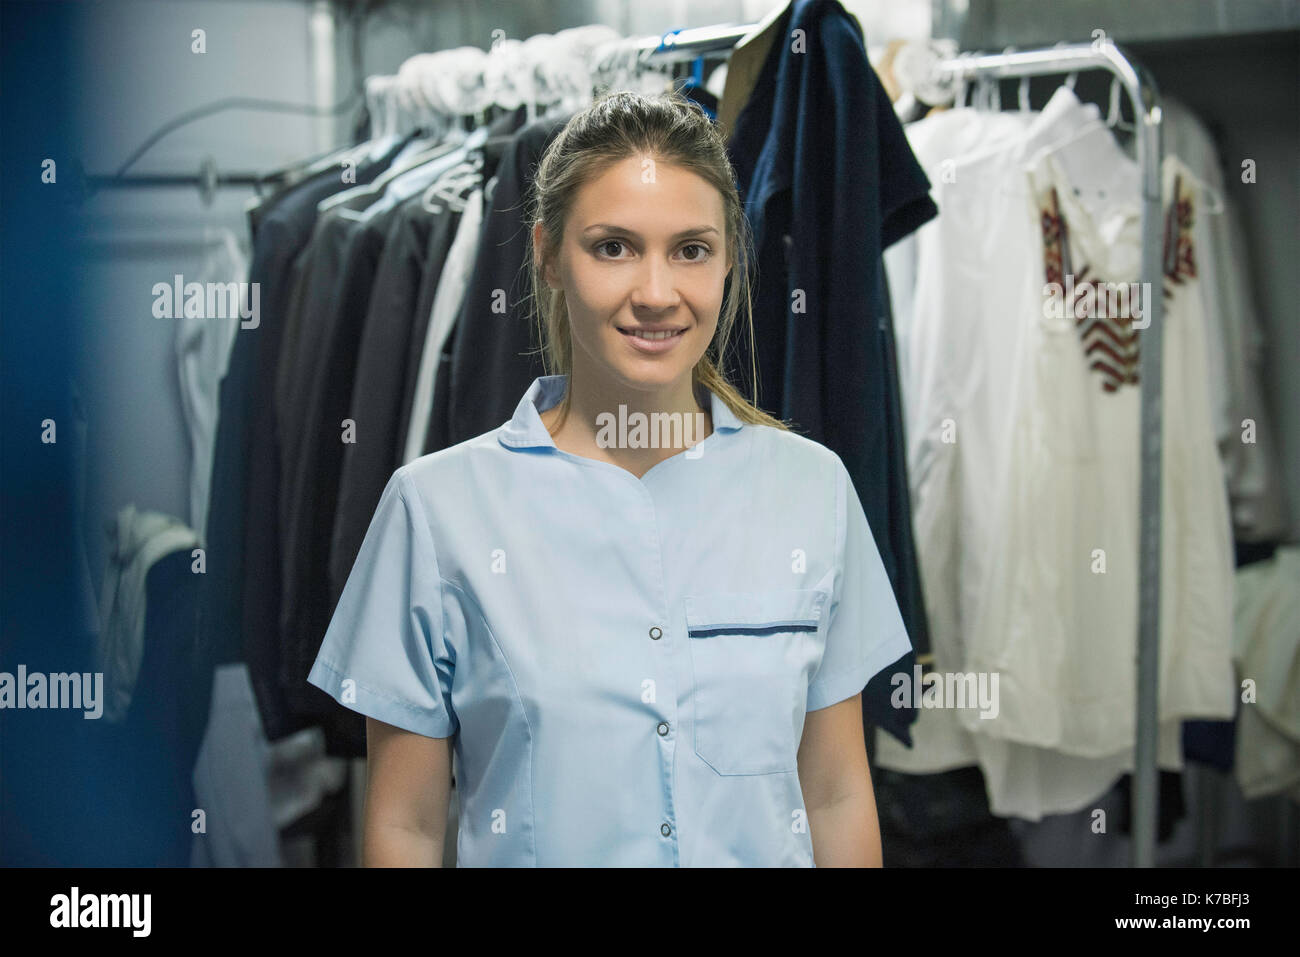 Young woman with clothes racks in foreground, portrait Stock Photo